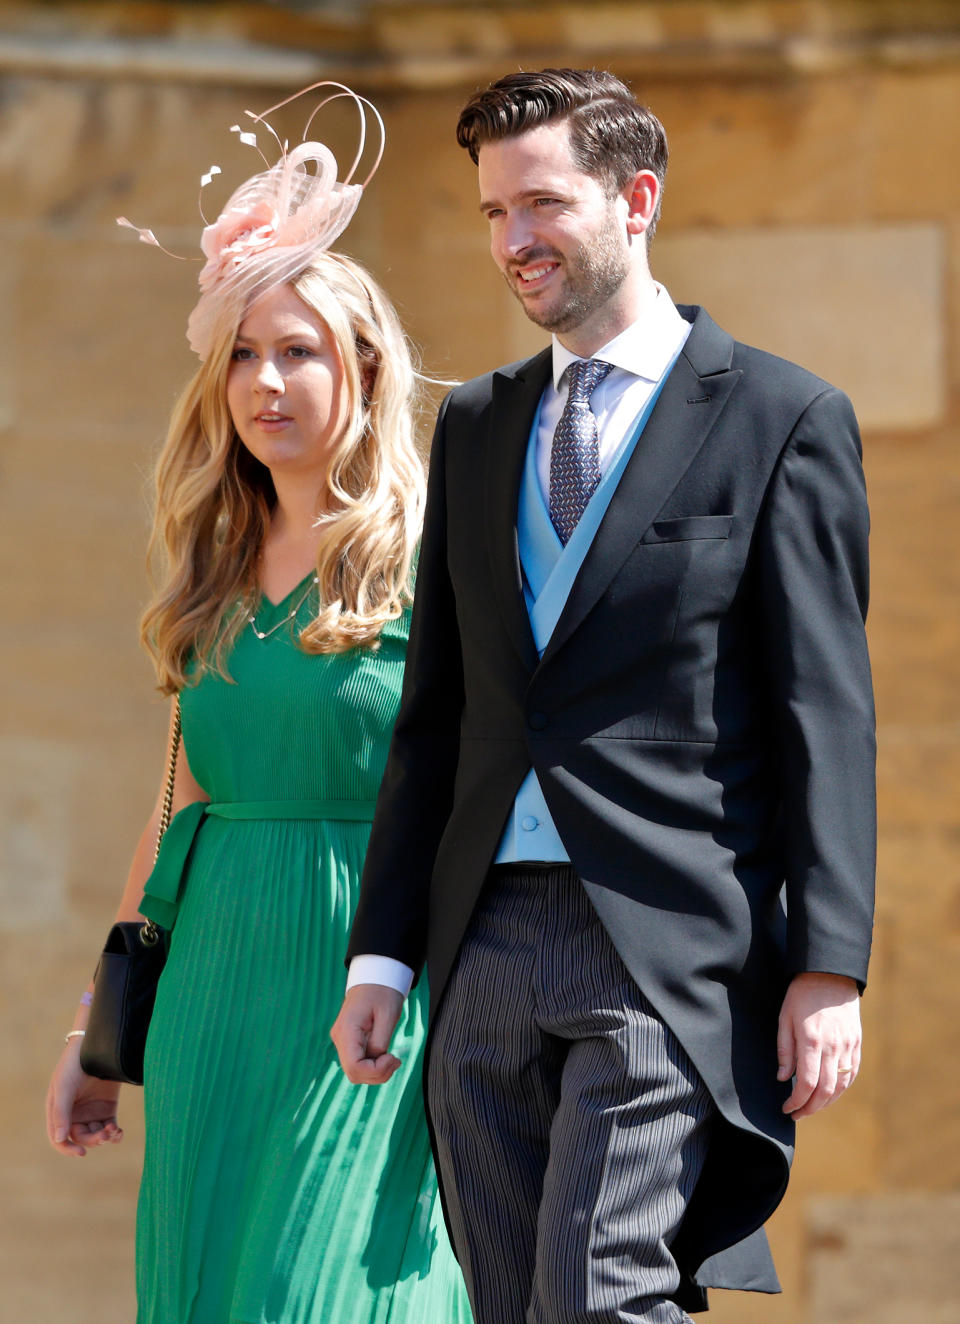 WINDSOR, UNITED KINGDOM - MAY 19: (EMBARGOED FOR PUBLICATION IN UK NEWSPAPERS UNTIL 24 HOURS AFTER CREATE DATE AND TIME) Jason Knauf, Communications Secretary to The Duke and Duchess of Cambridge and The Duke and Duchess of Sussex, attends the wedding of Prince Harry to Ms Meghan Markle at St George's Chapel, Windsor Castle on May 19, 2018 in Windsor, England. Prince Henry Charles Albert David of Wales marries Ms. Meghan Markle in a service at St George's Chapel inside the grounds of Windsor Castle. Among the guests were 2200 members of the public, the royal family and Ms. Markle's Mother Doria Ragland. (Photo by Max Mumby/Indigo/Getty Images)